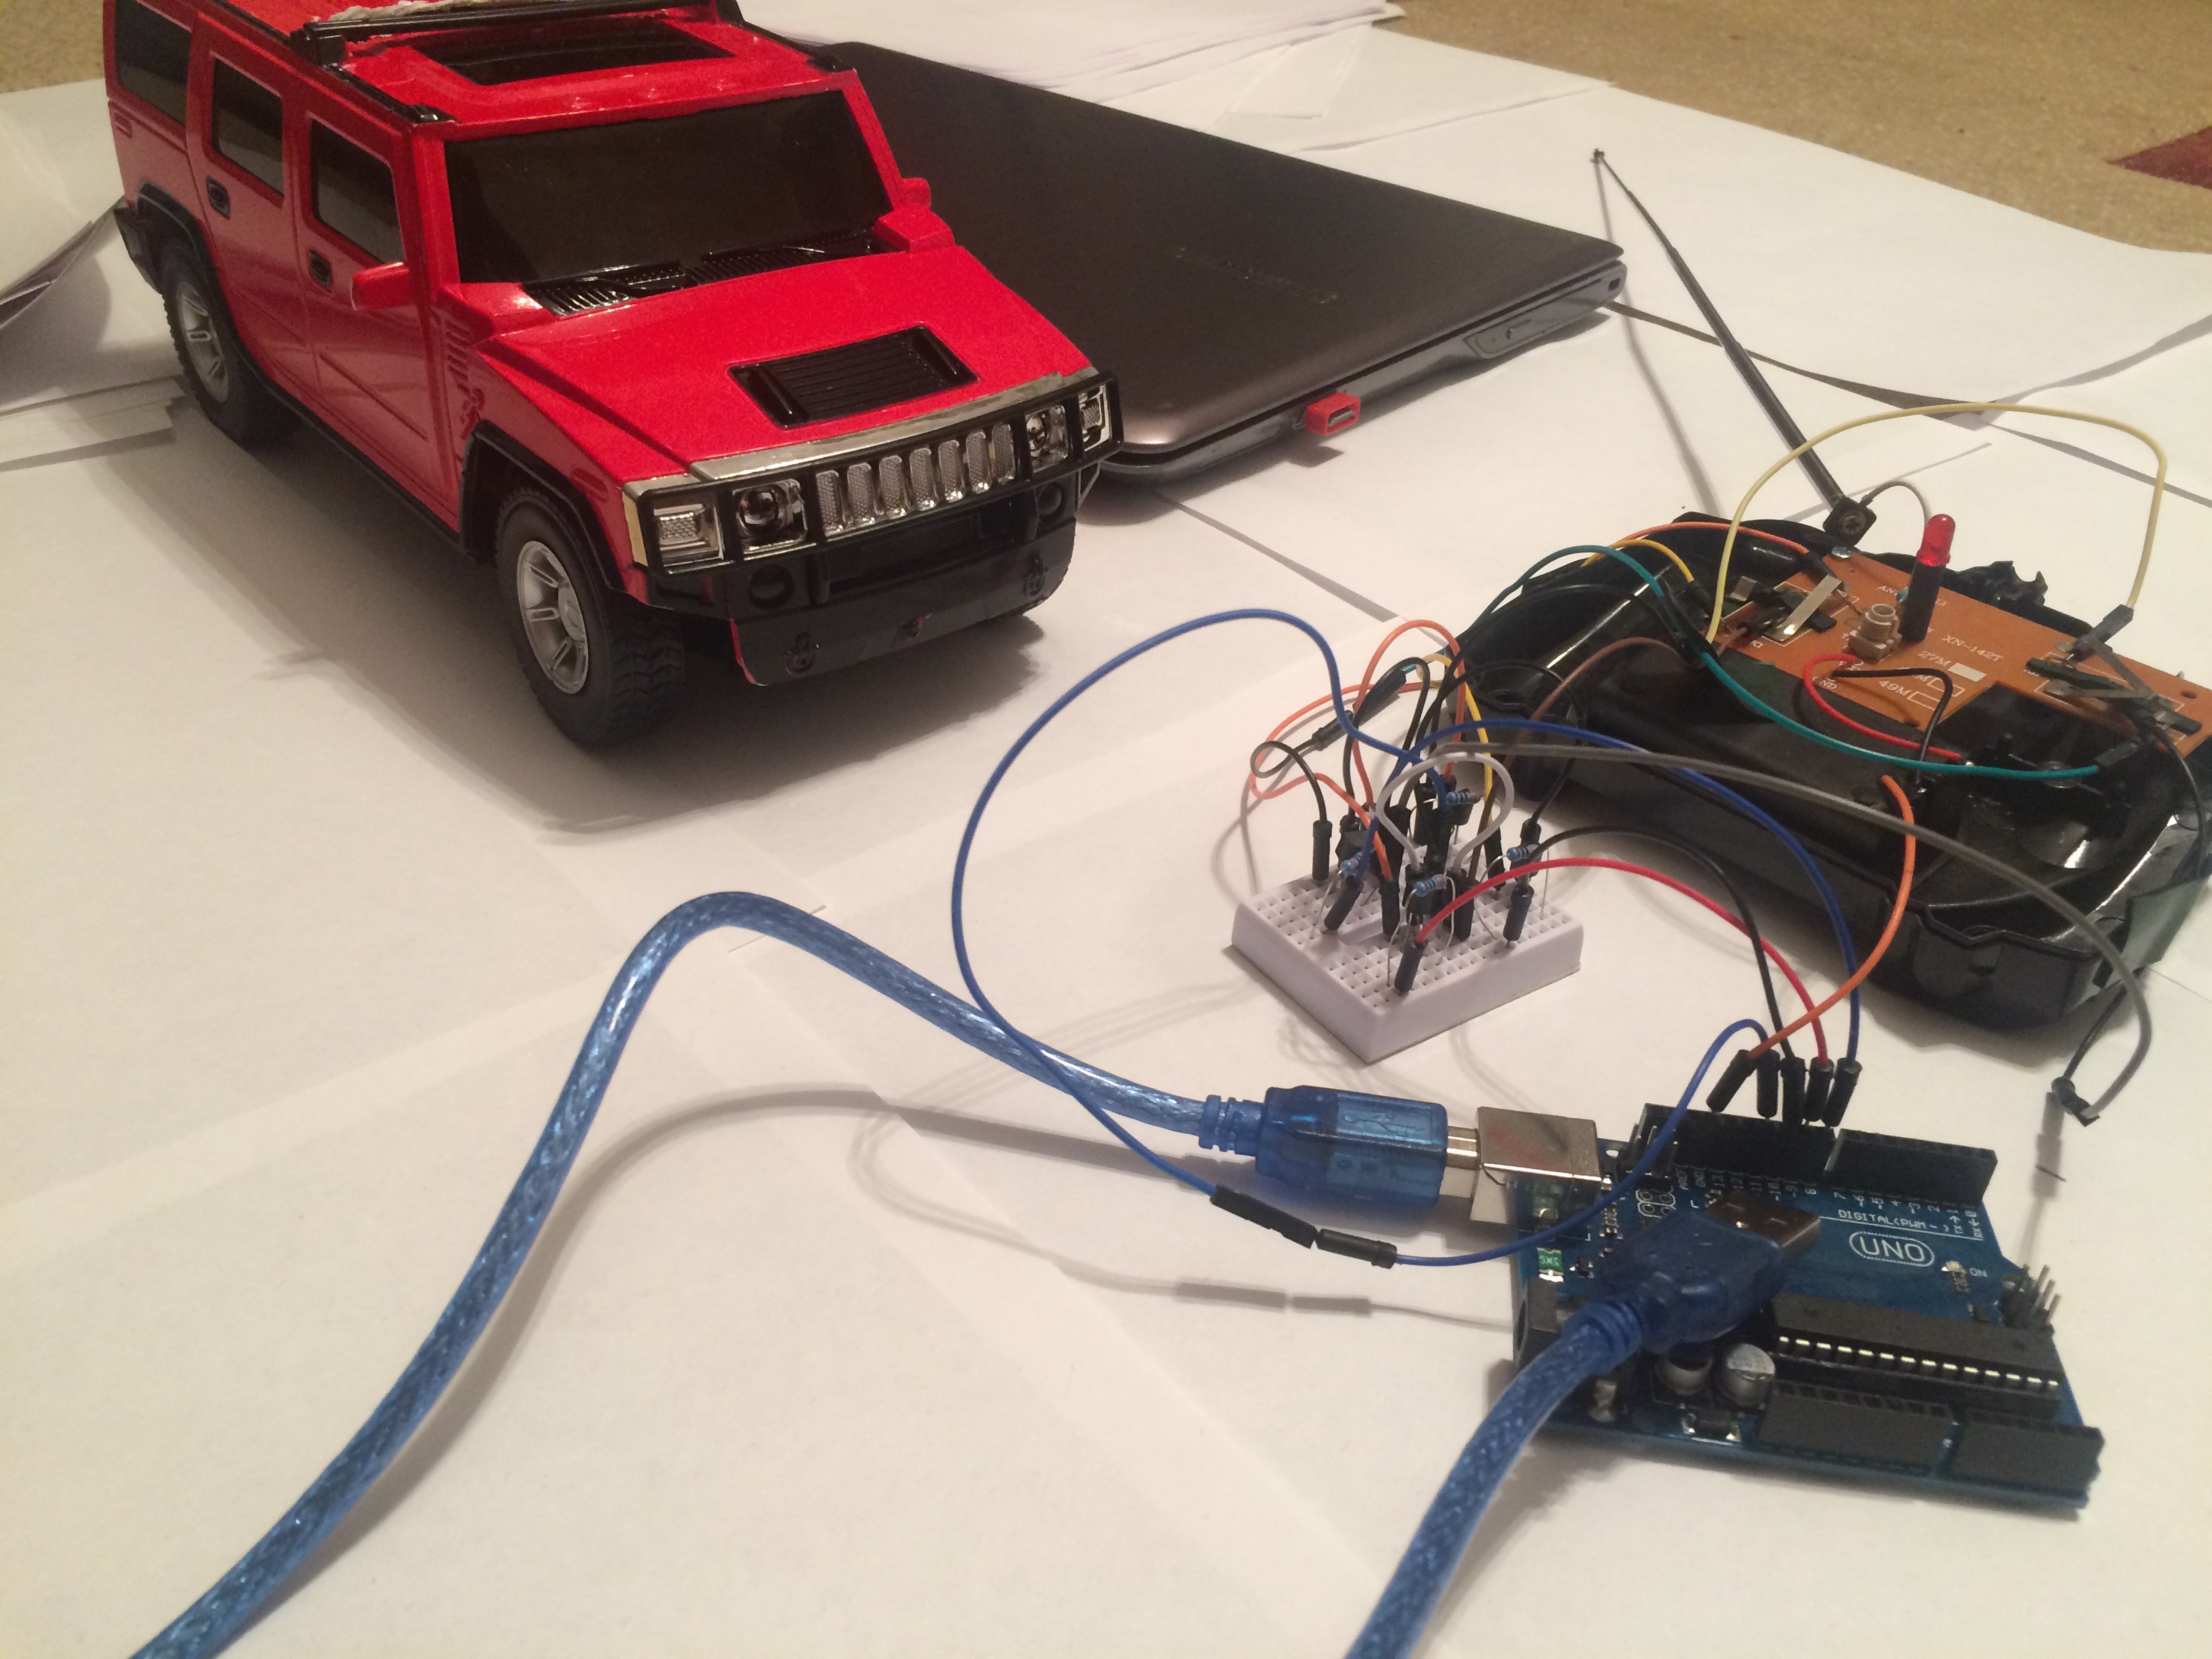 Red Hummer and disassembled radio control connected to Arduino